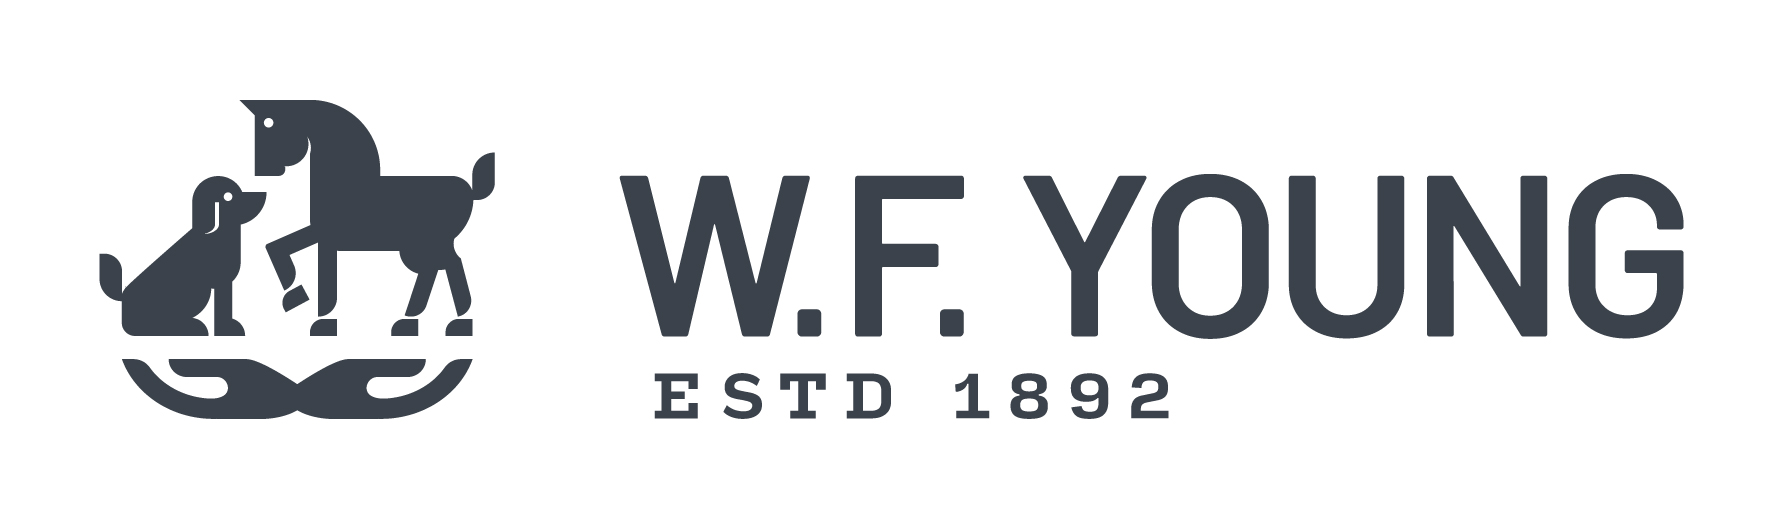 W.F. Young's new logo, celebrating its 130th year in business